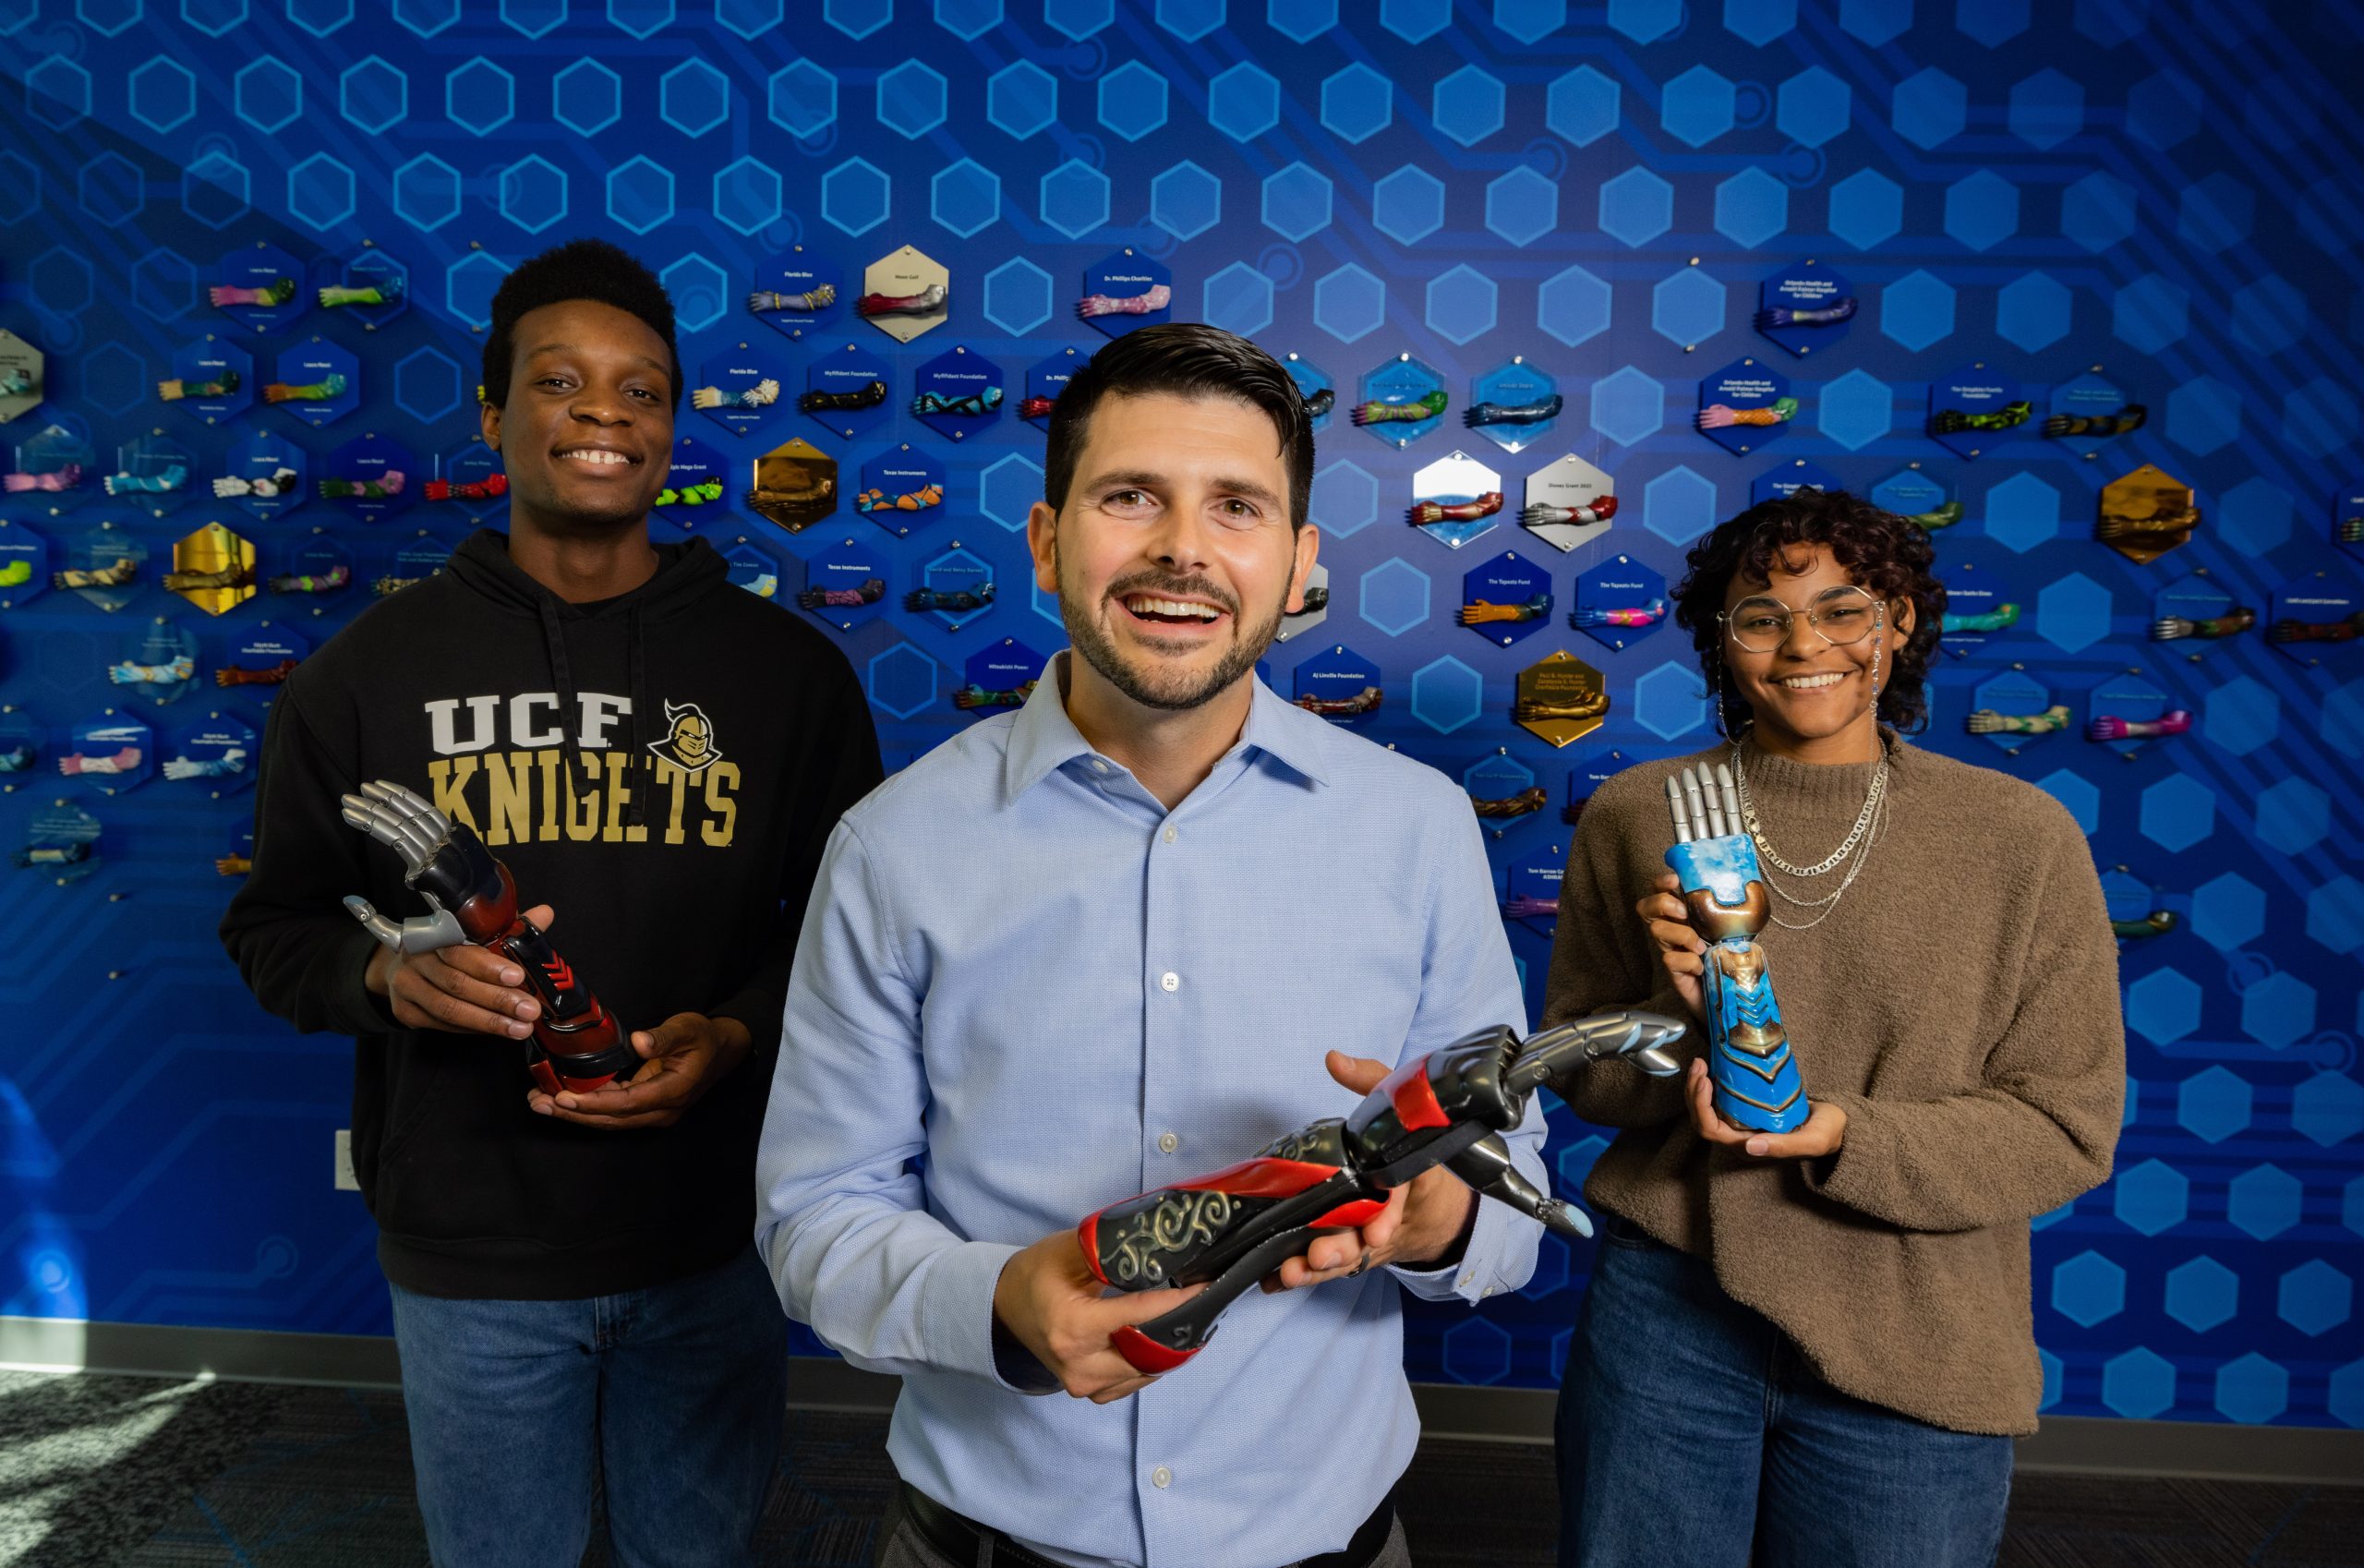 Owner, Albert Manero and two University of Central Florida students proudly display bionic arms.